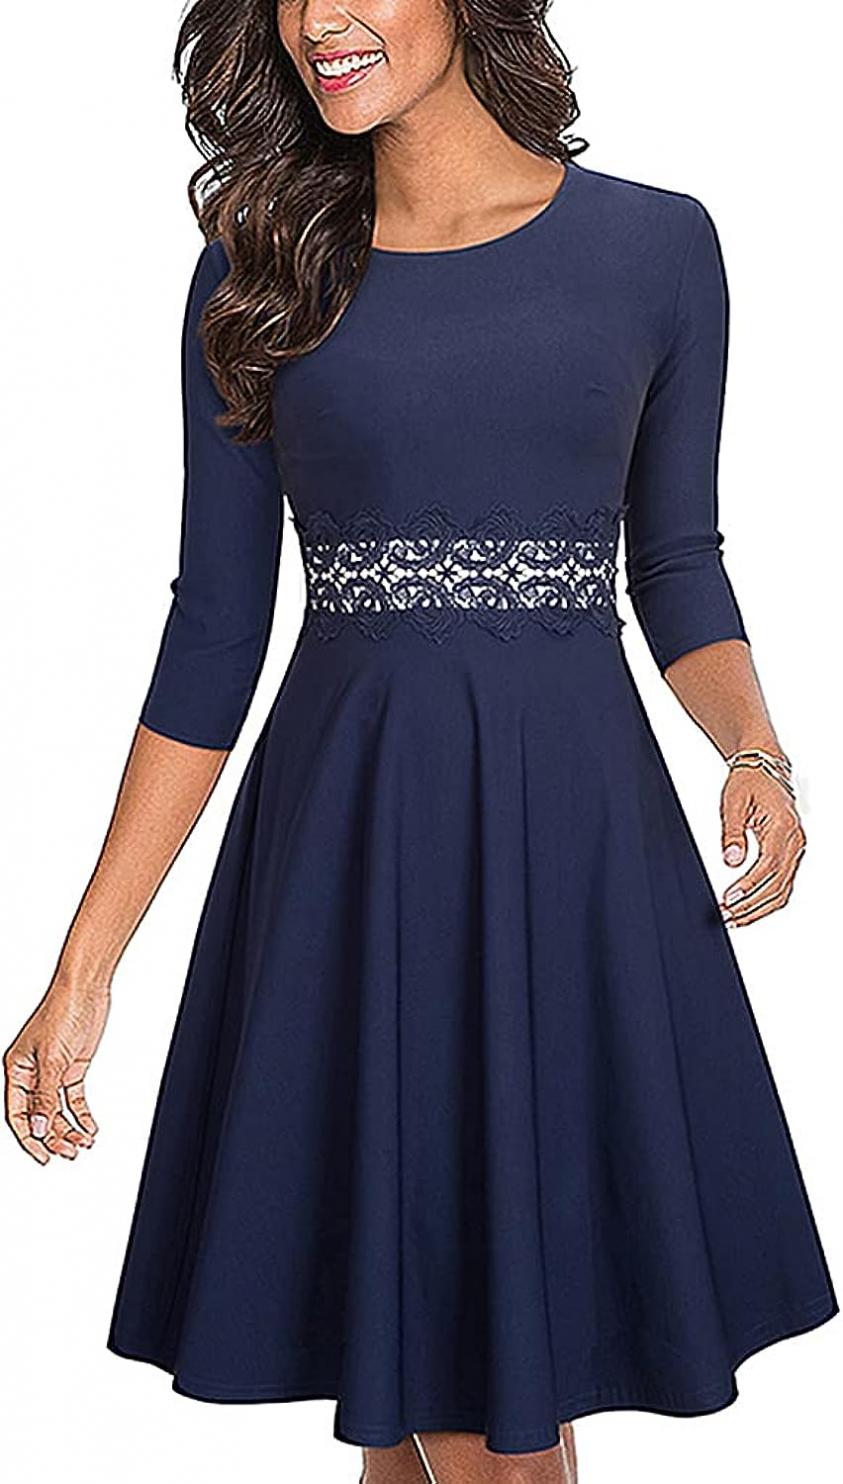 HOMEYEE Women's Cocktail A-Line Embroidery Casual Party Summer Wedding Guest Dress A079